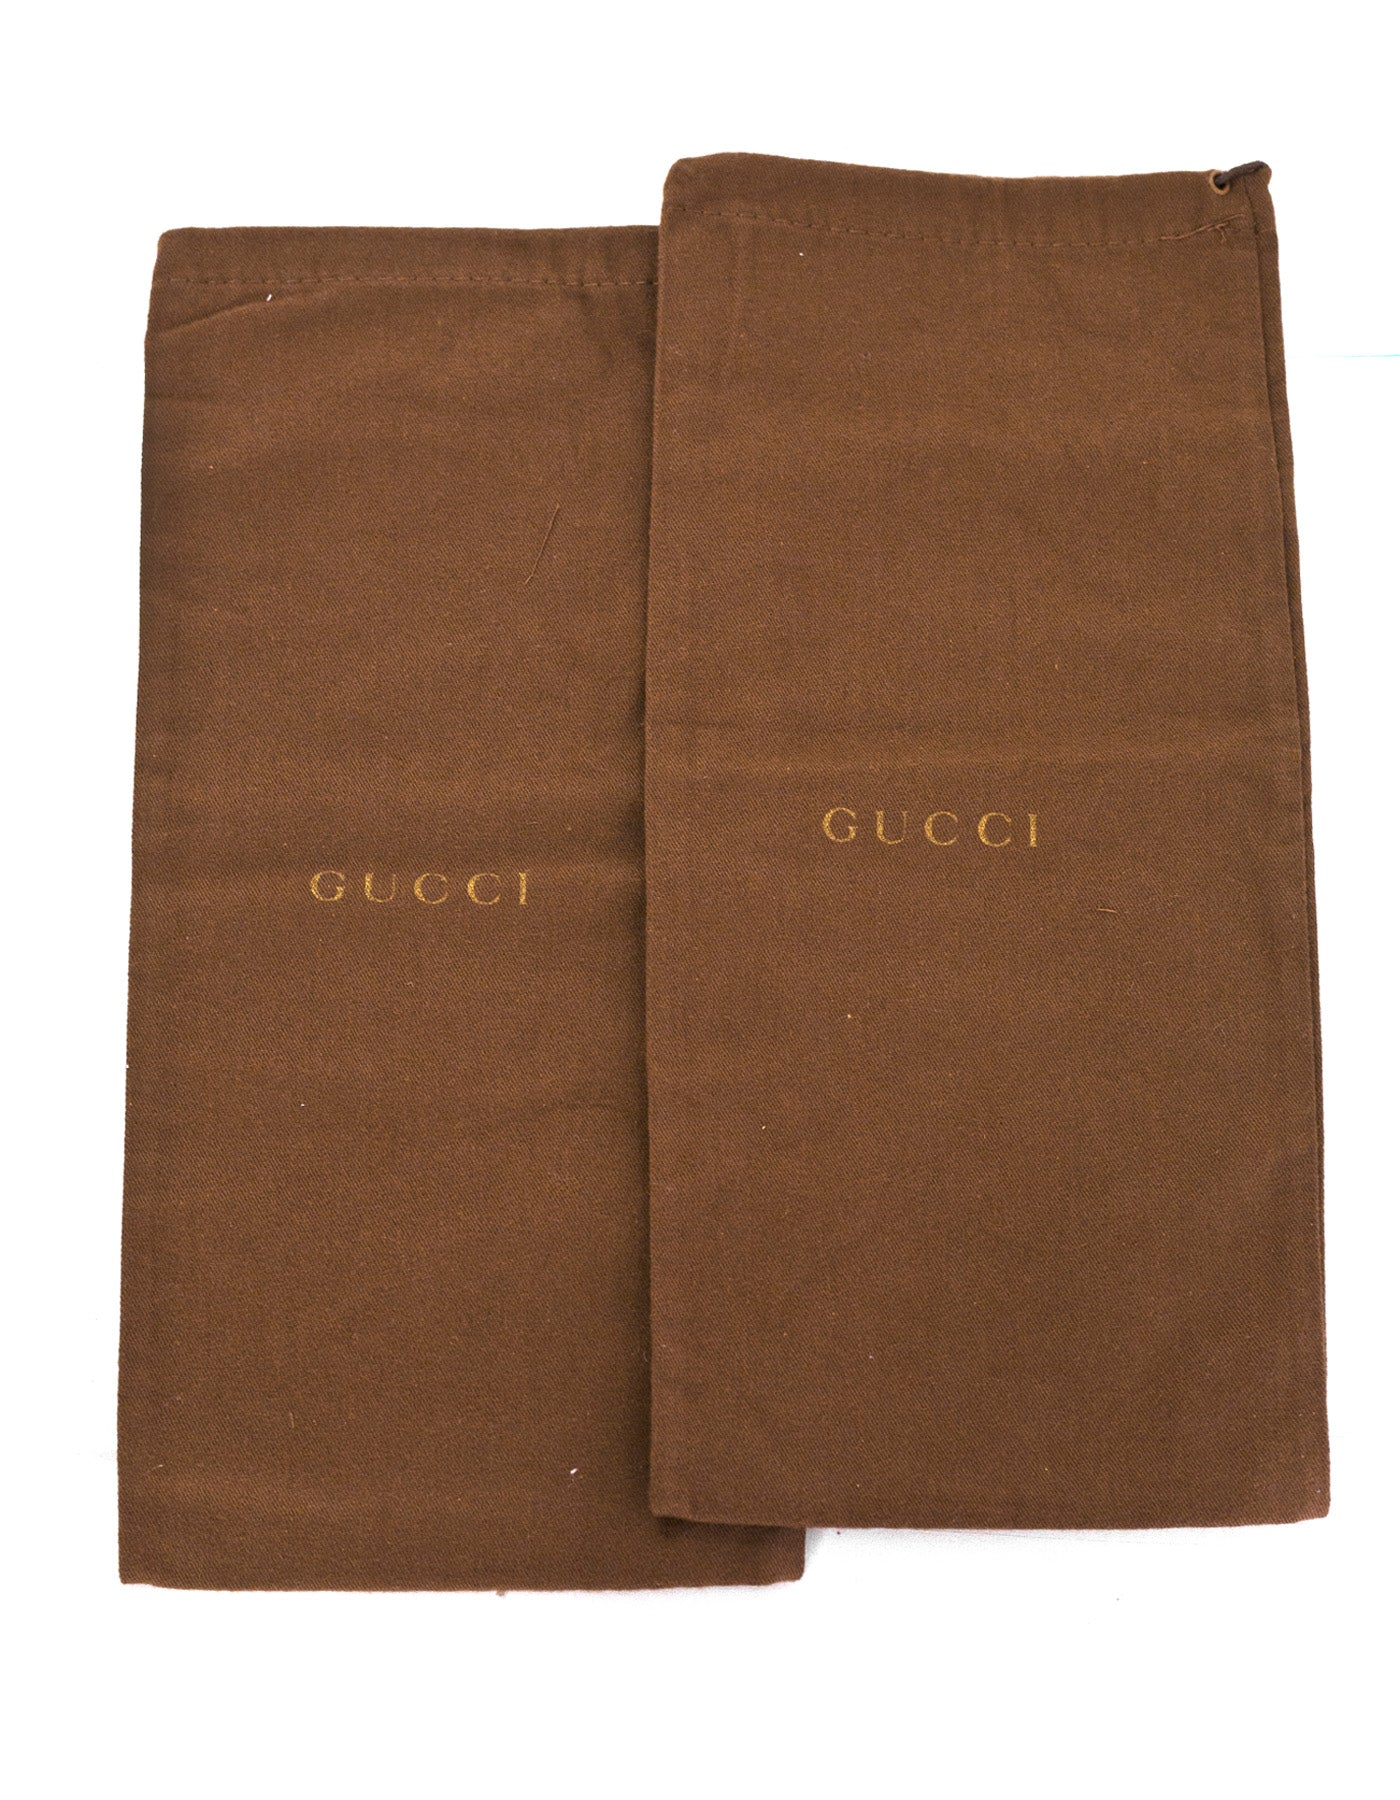 Gucci Brown Canvas Set of Two Travel Shoe Dust Bags